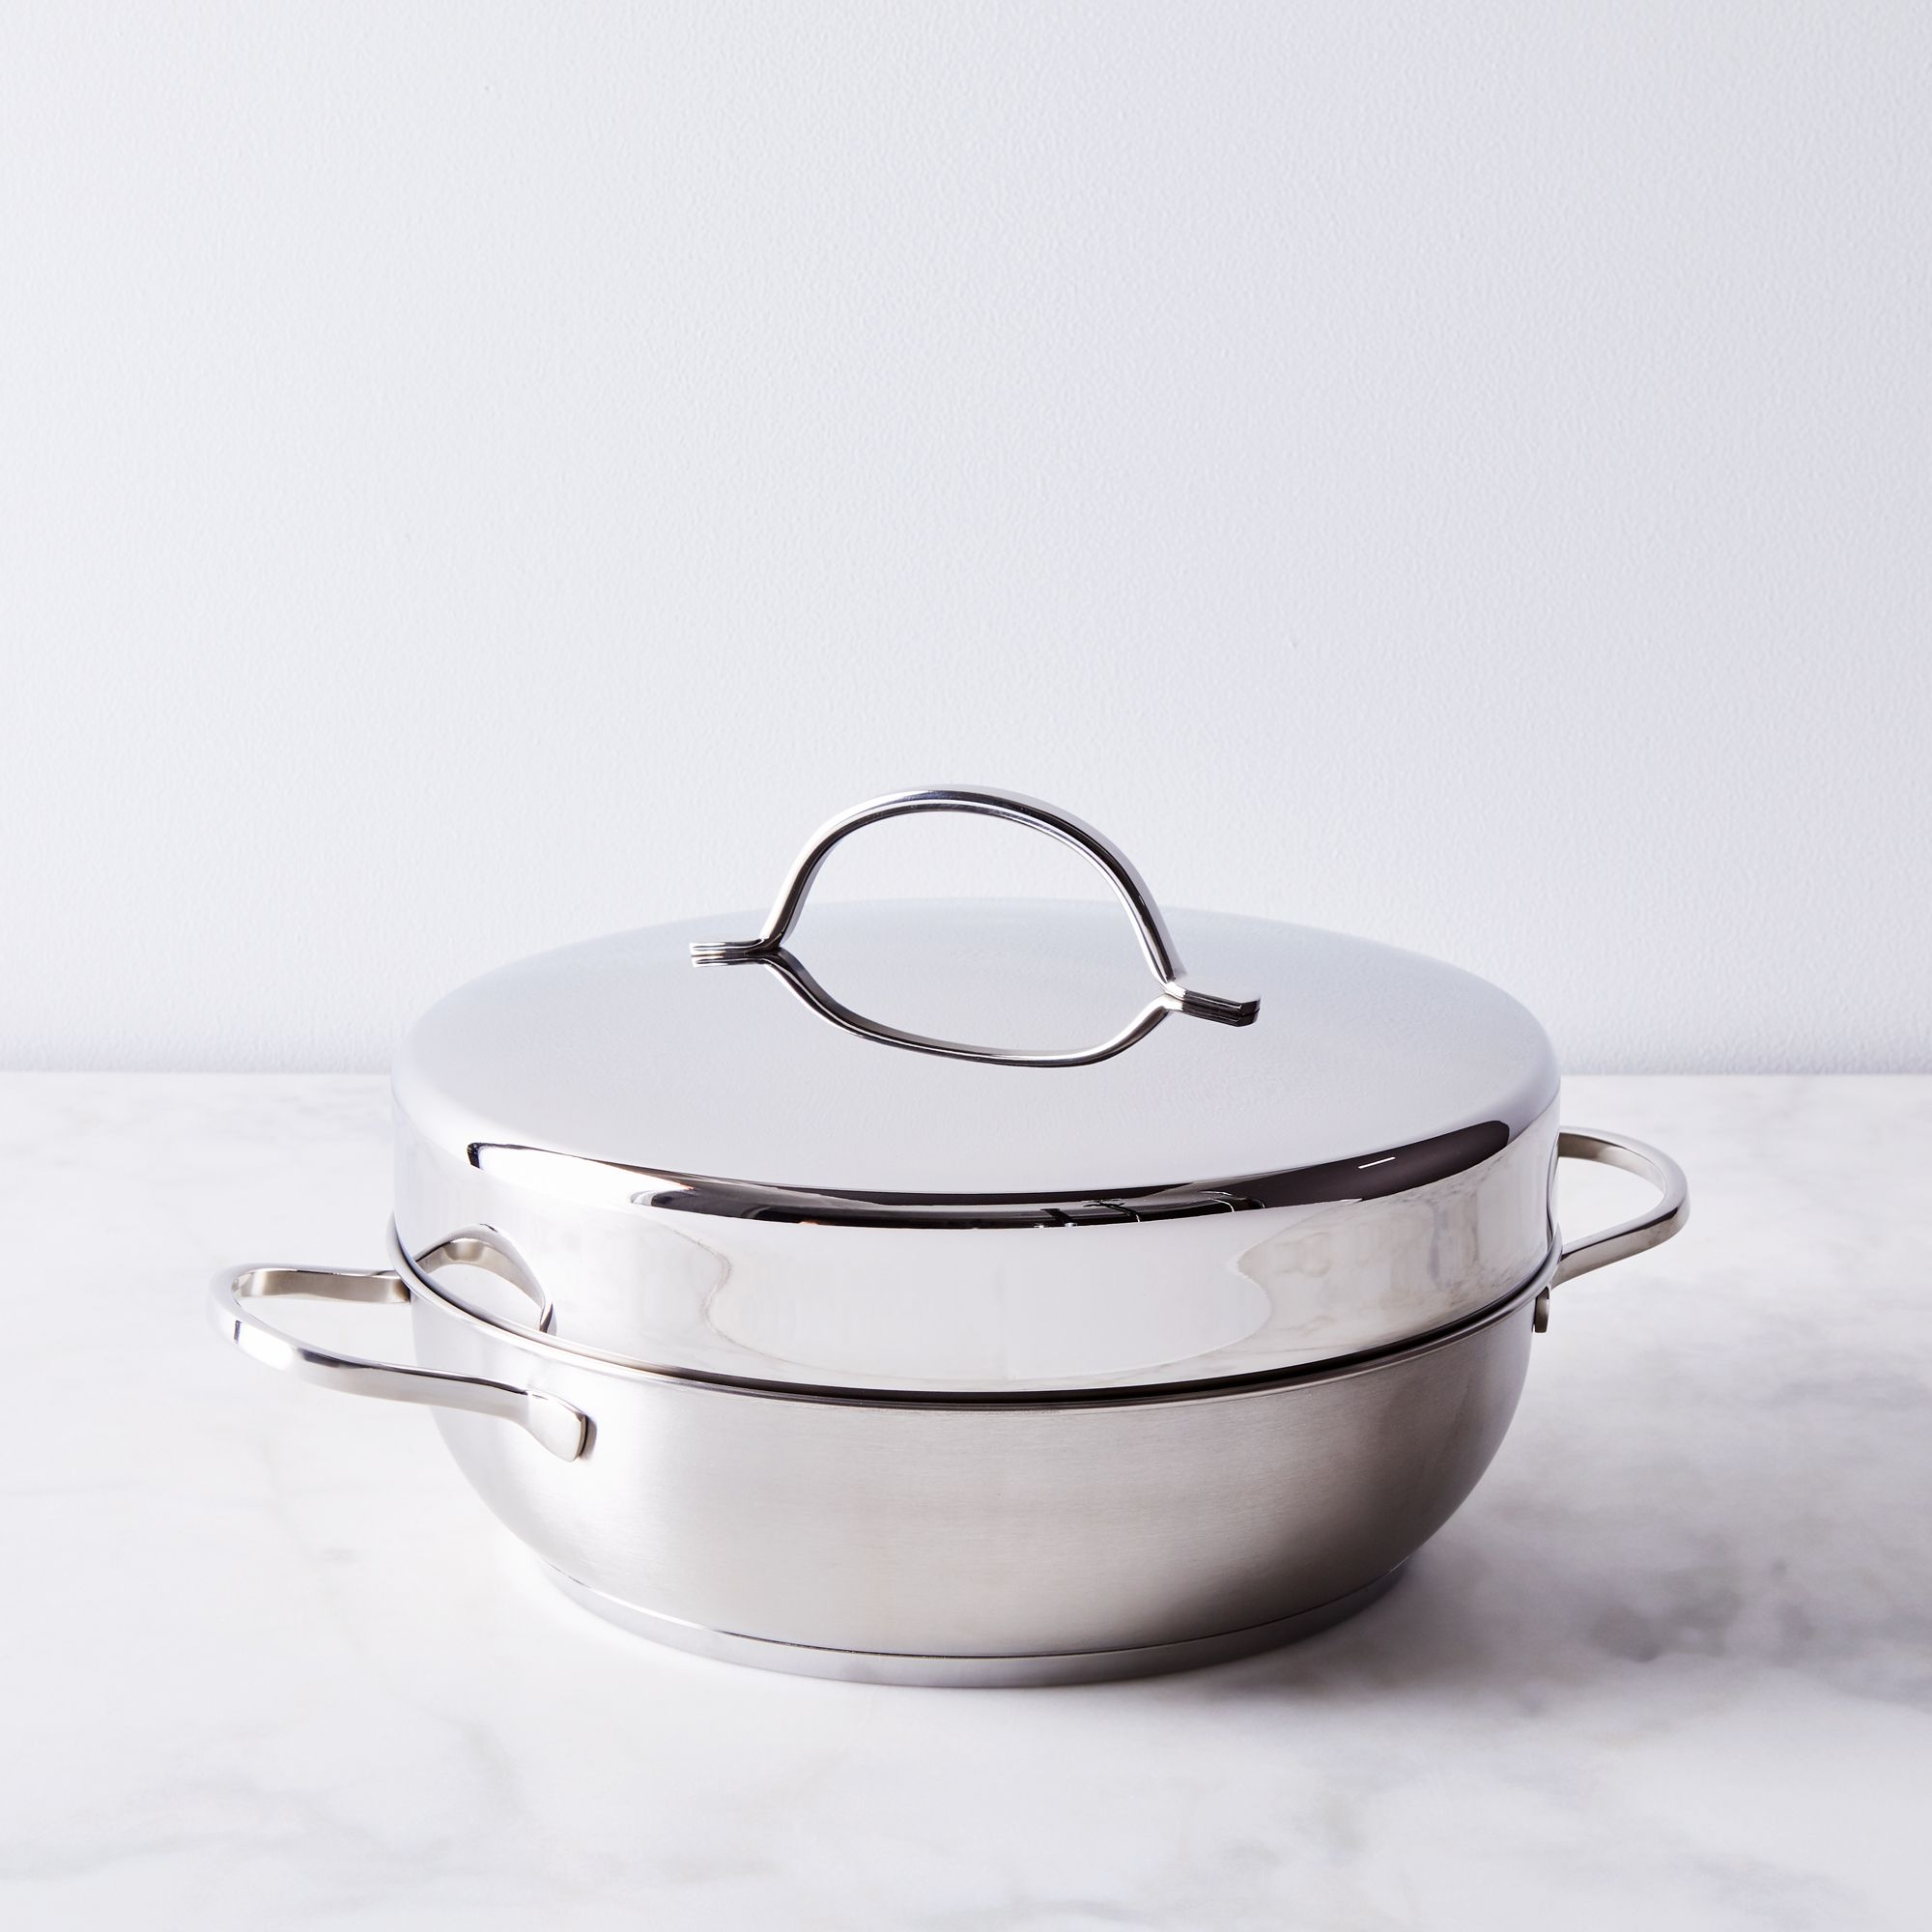 Cookware by Bedazzle